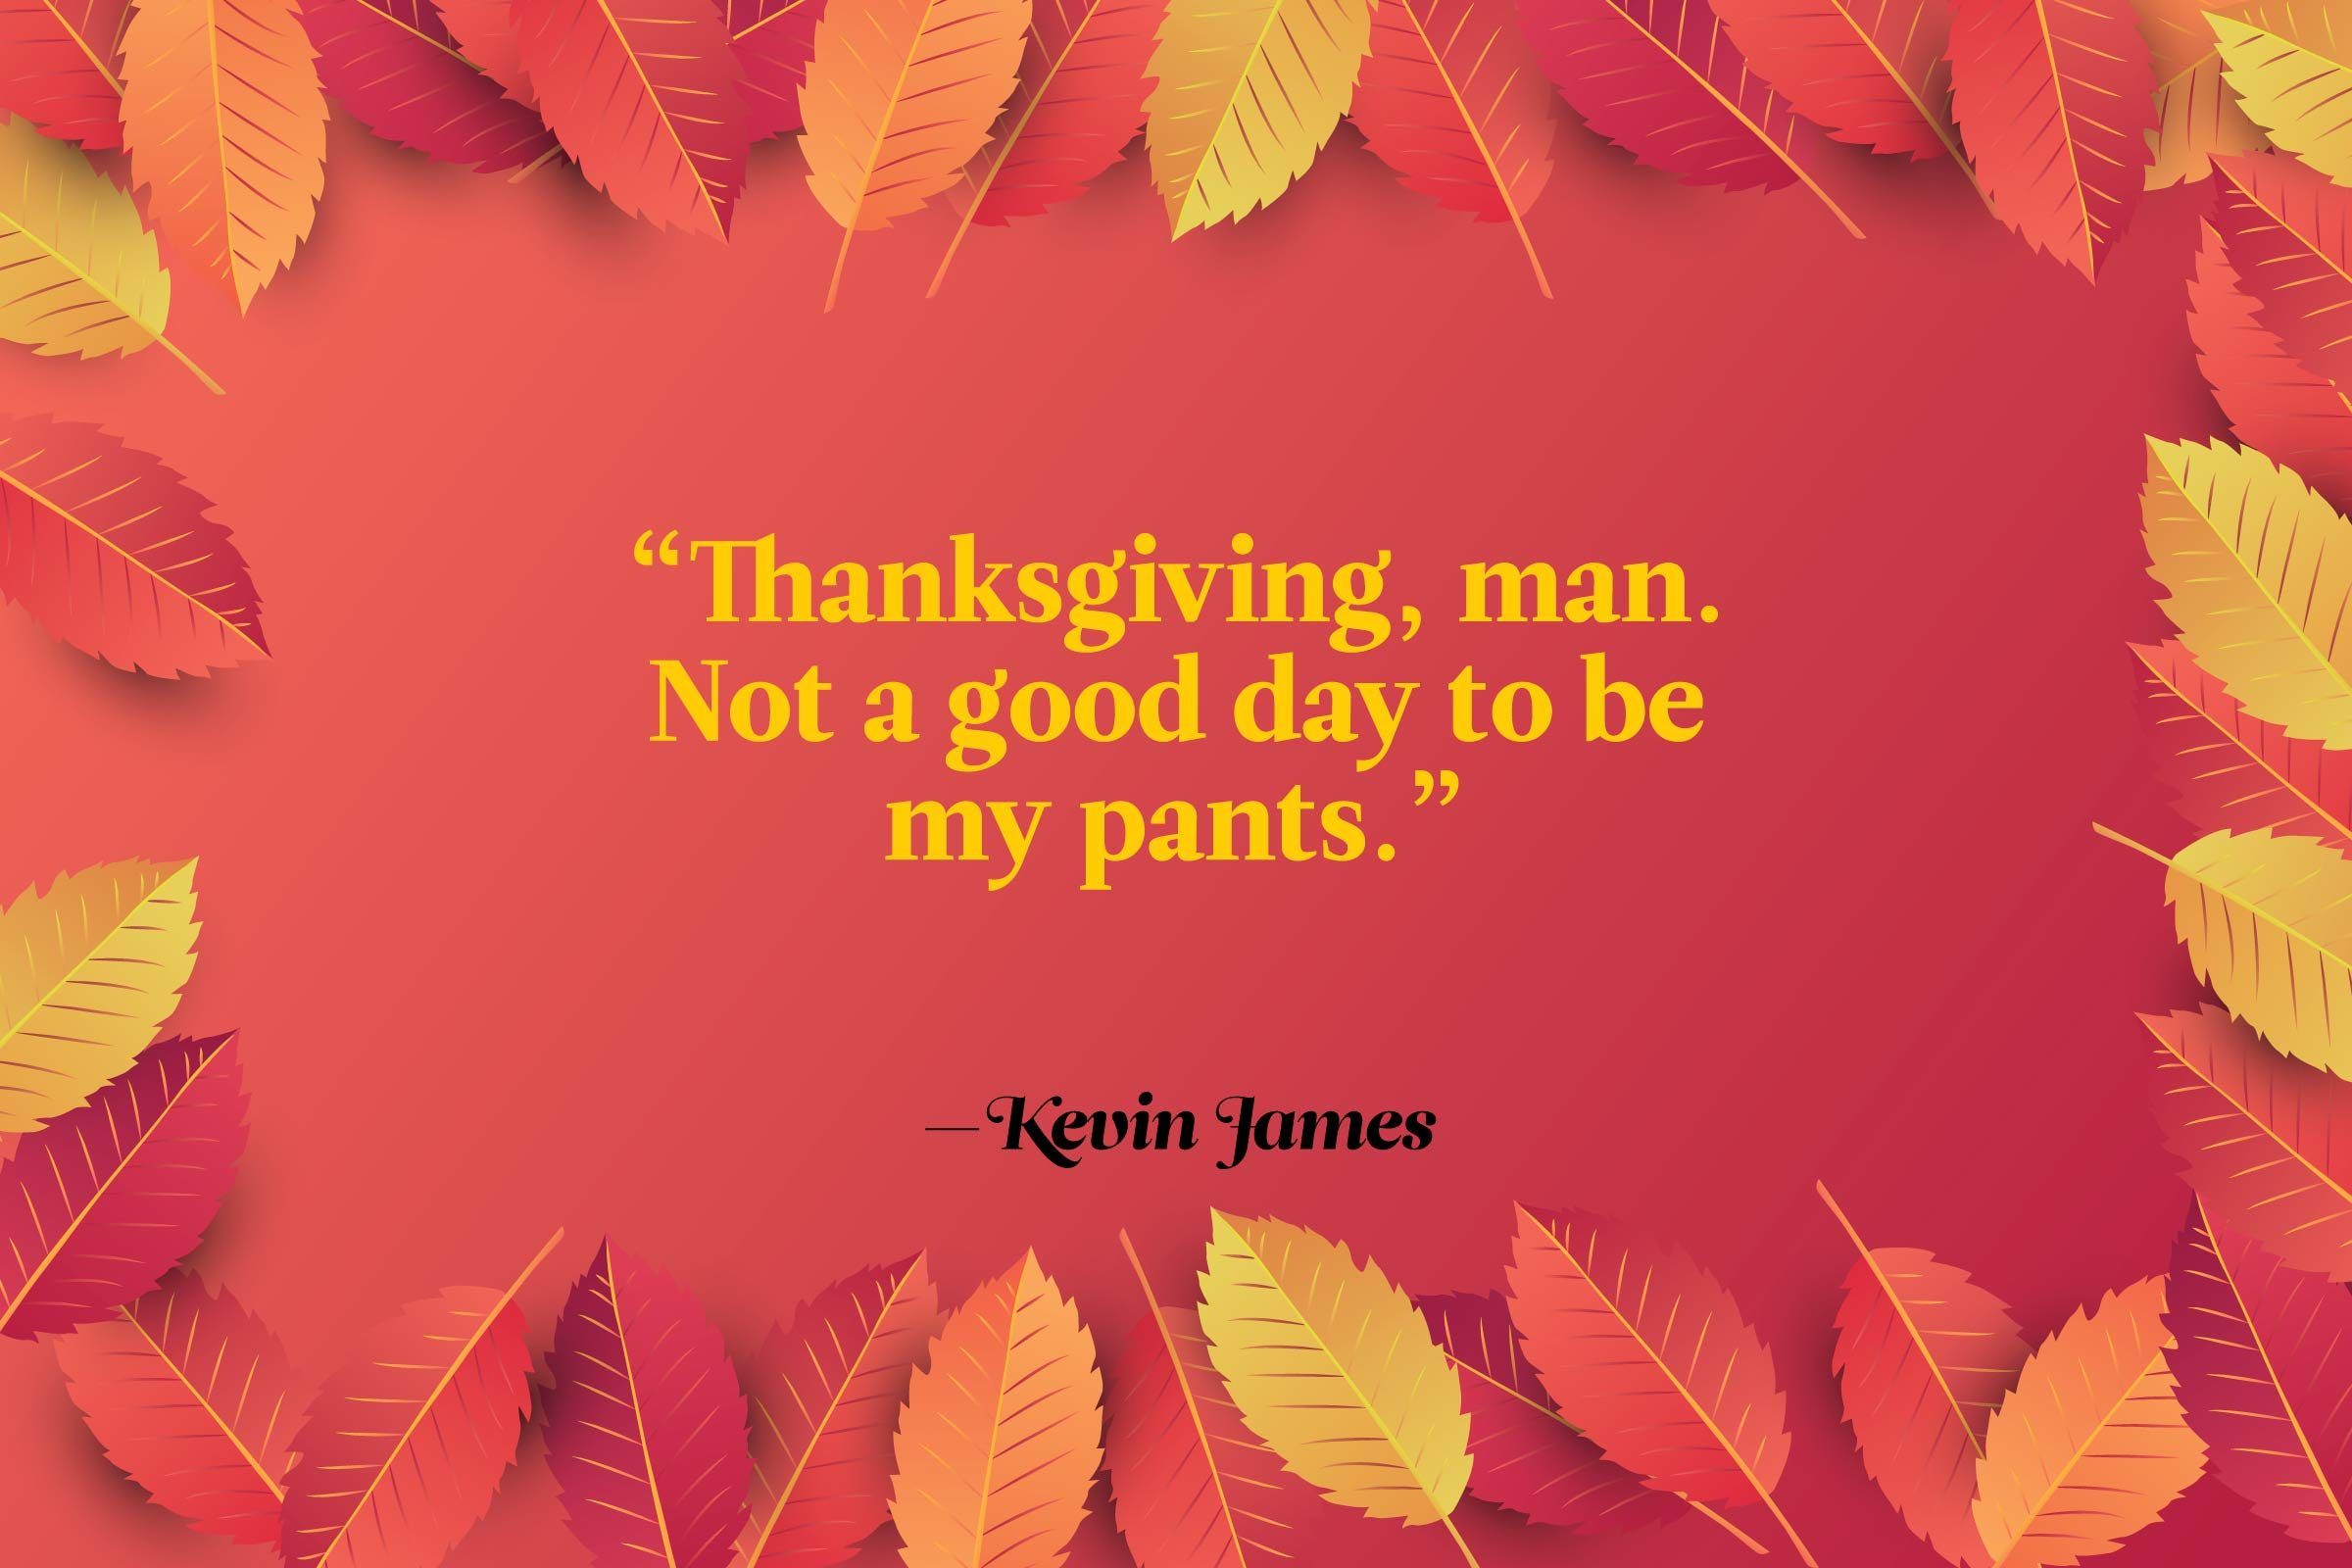 Funny Thanksgiving Quotes - Kevin James